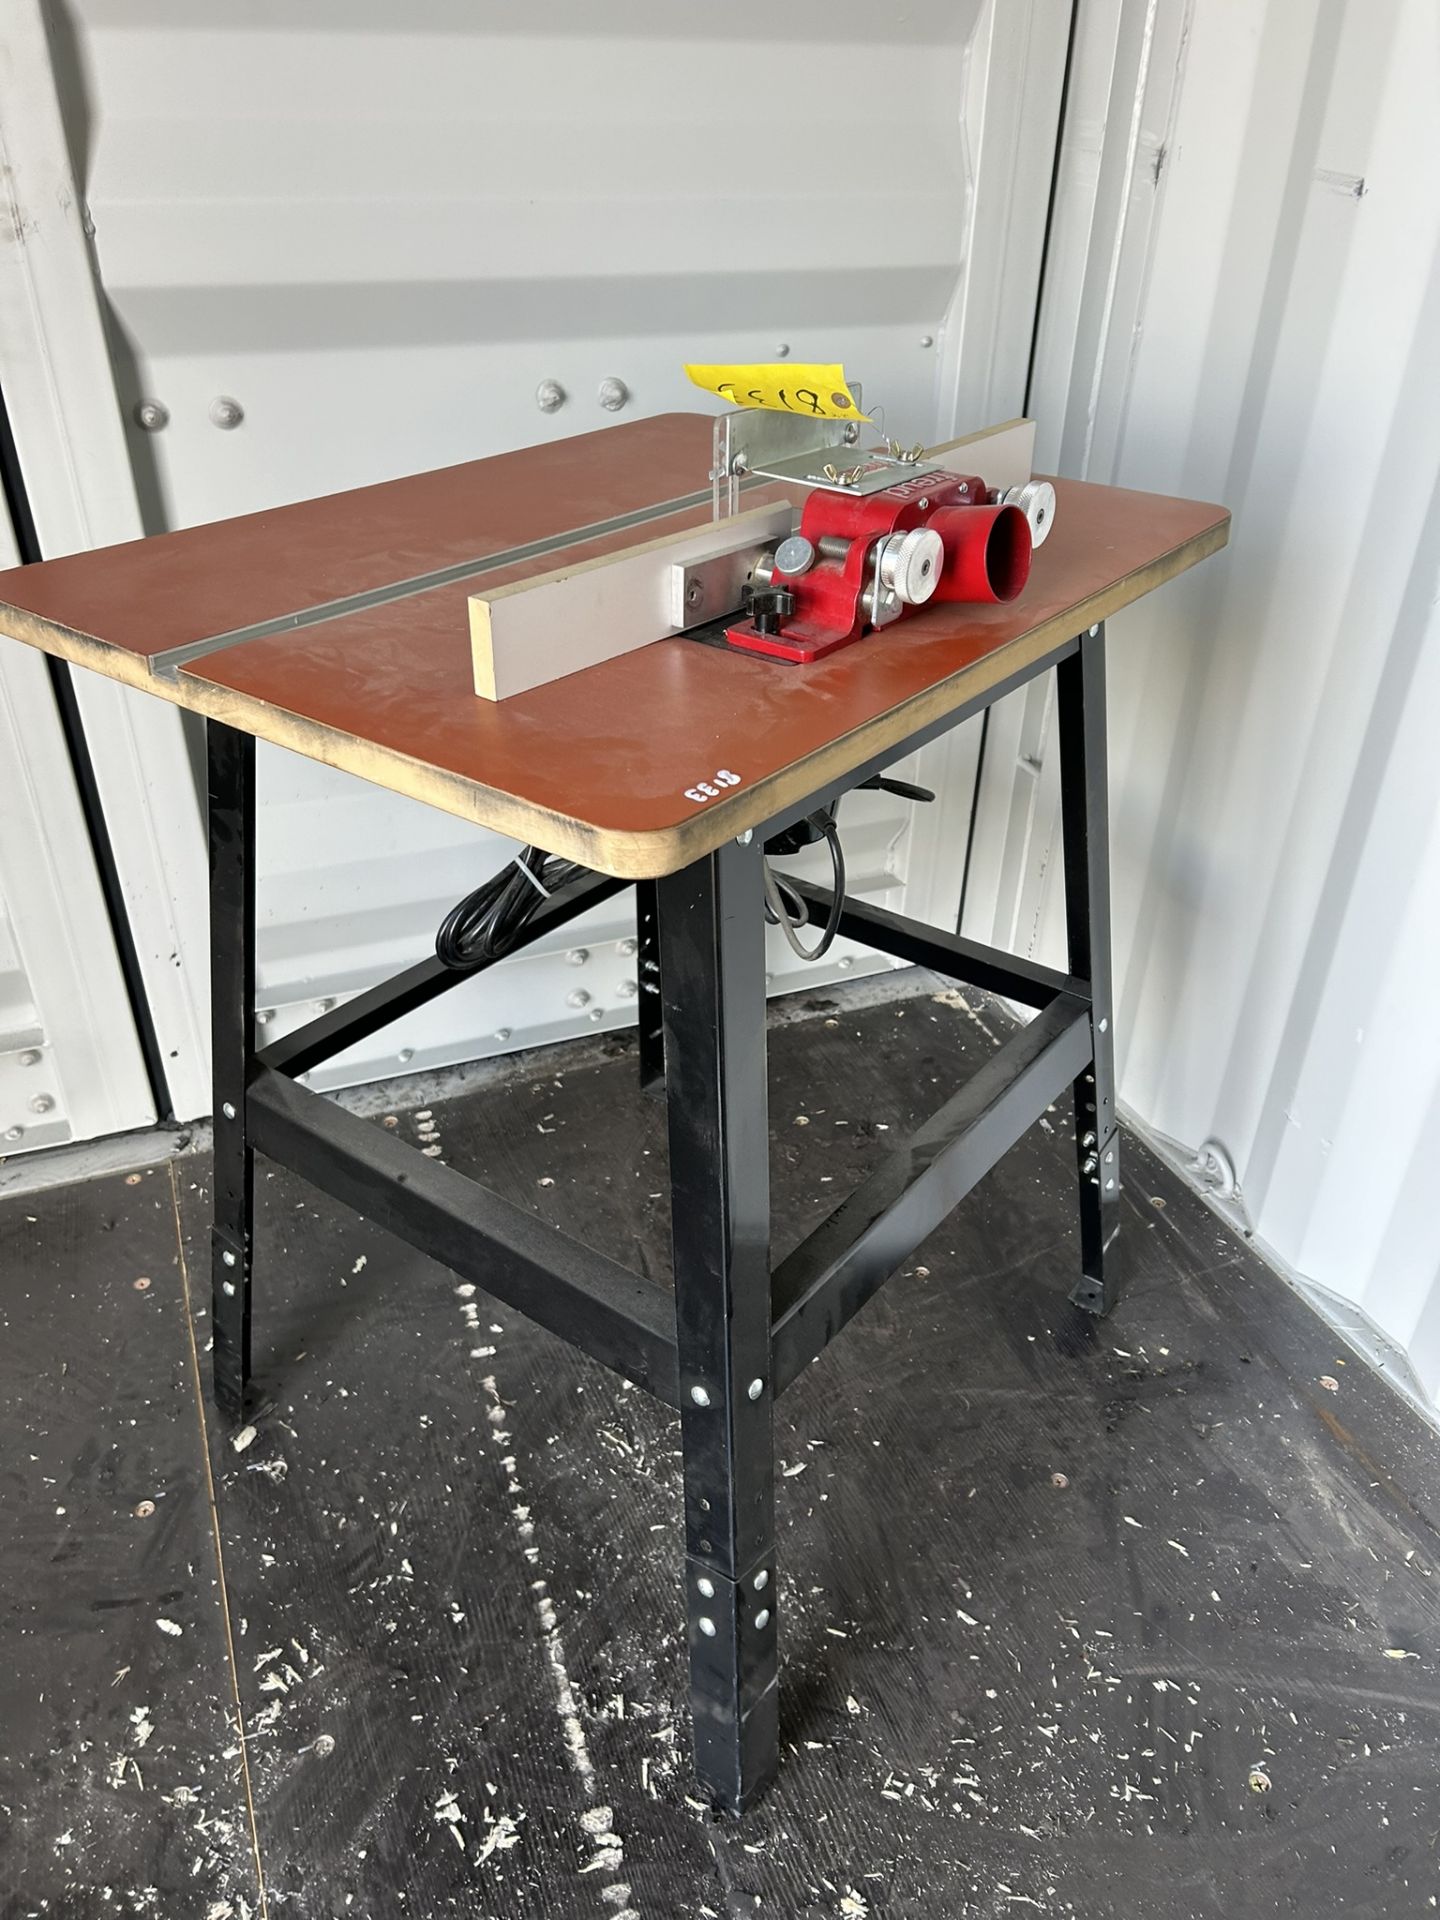 FREUD ROUTER TABLE W/SEARS ROUTER - Image 4 of 7